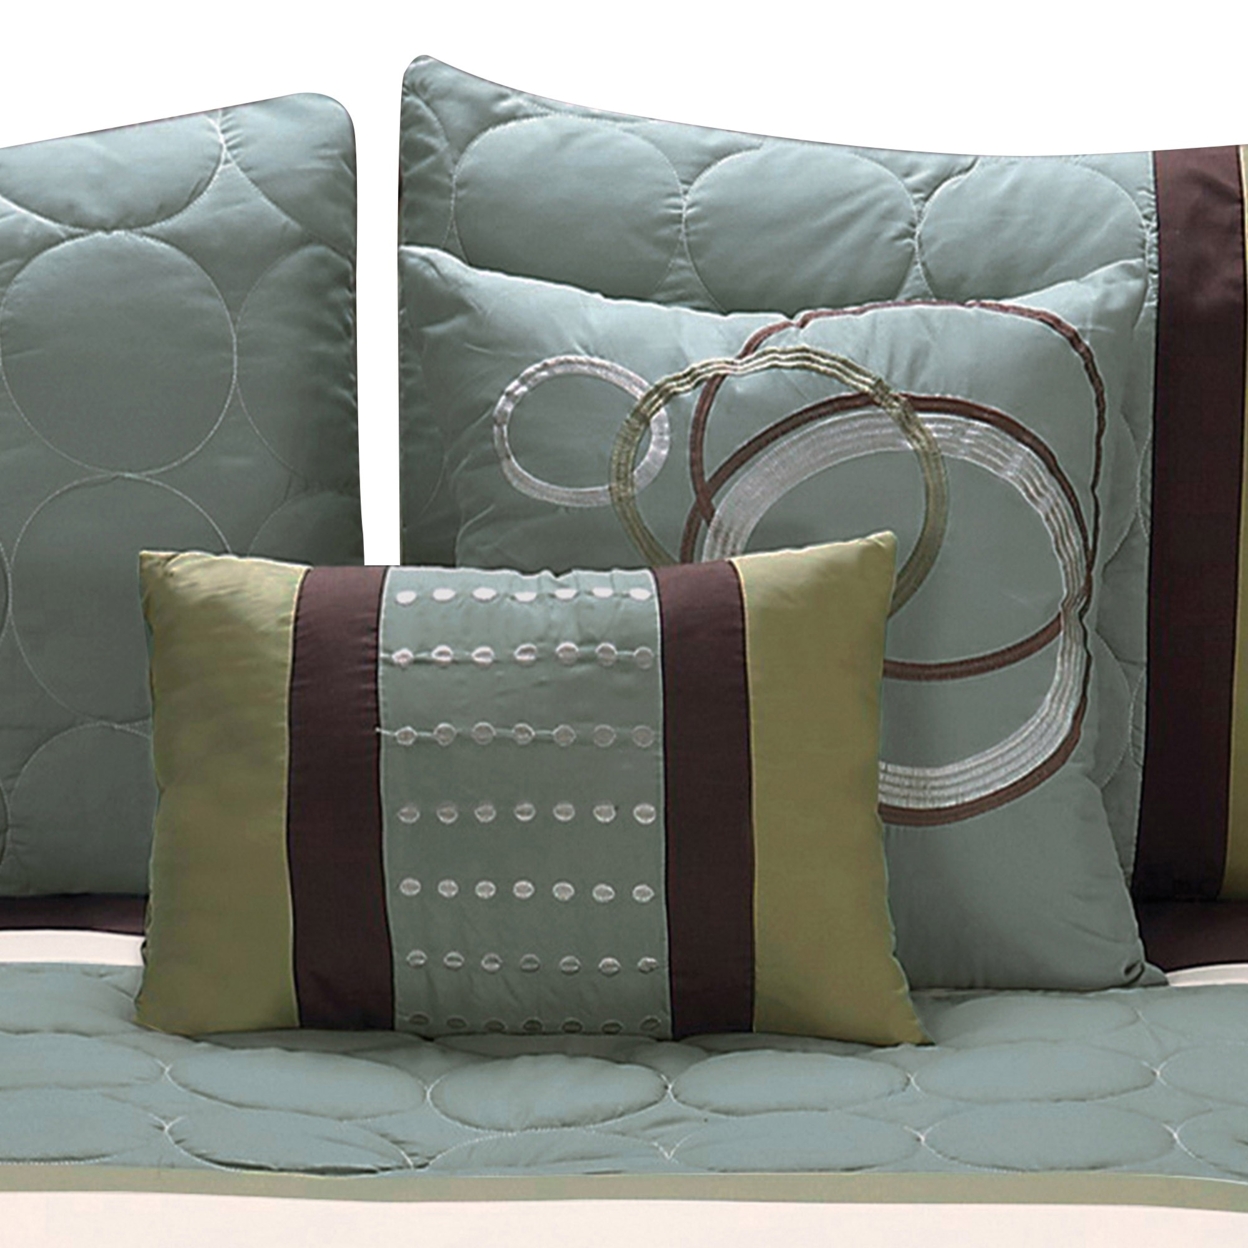 6 Piece King Comforter Set With Pleats And Embroidery, Green And Blue- Saltoro Sherpi